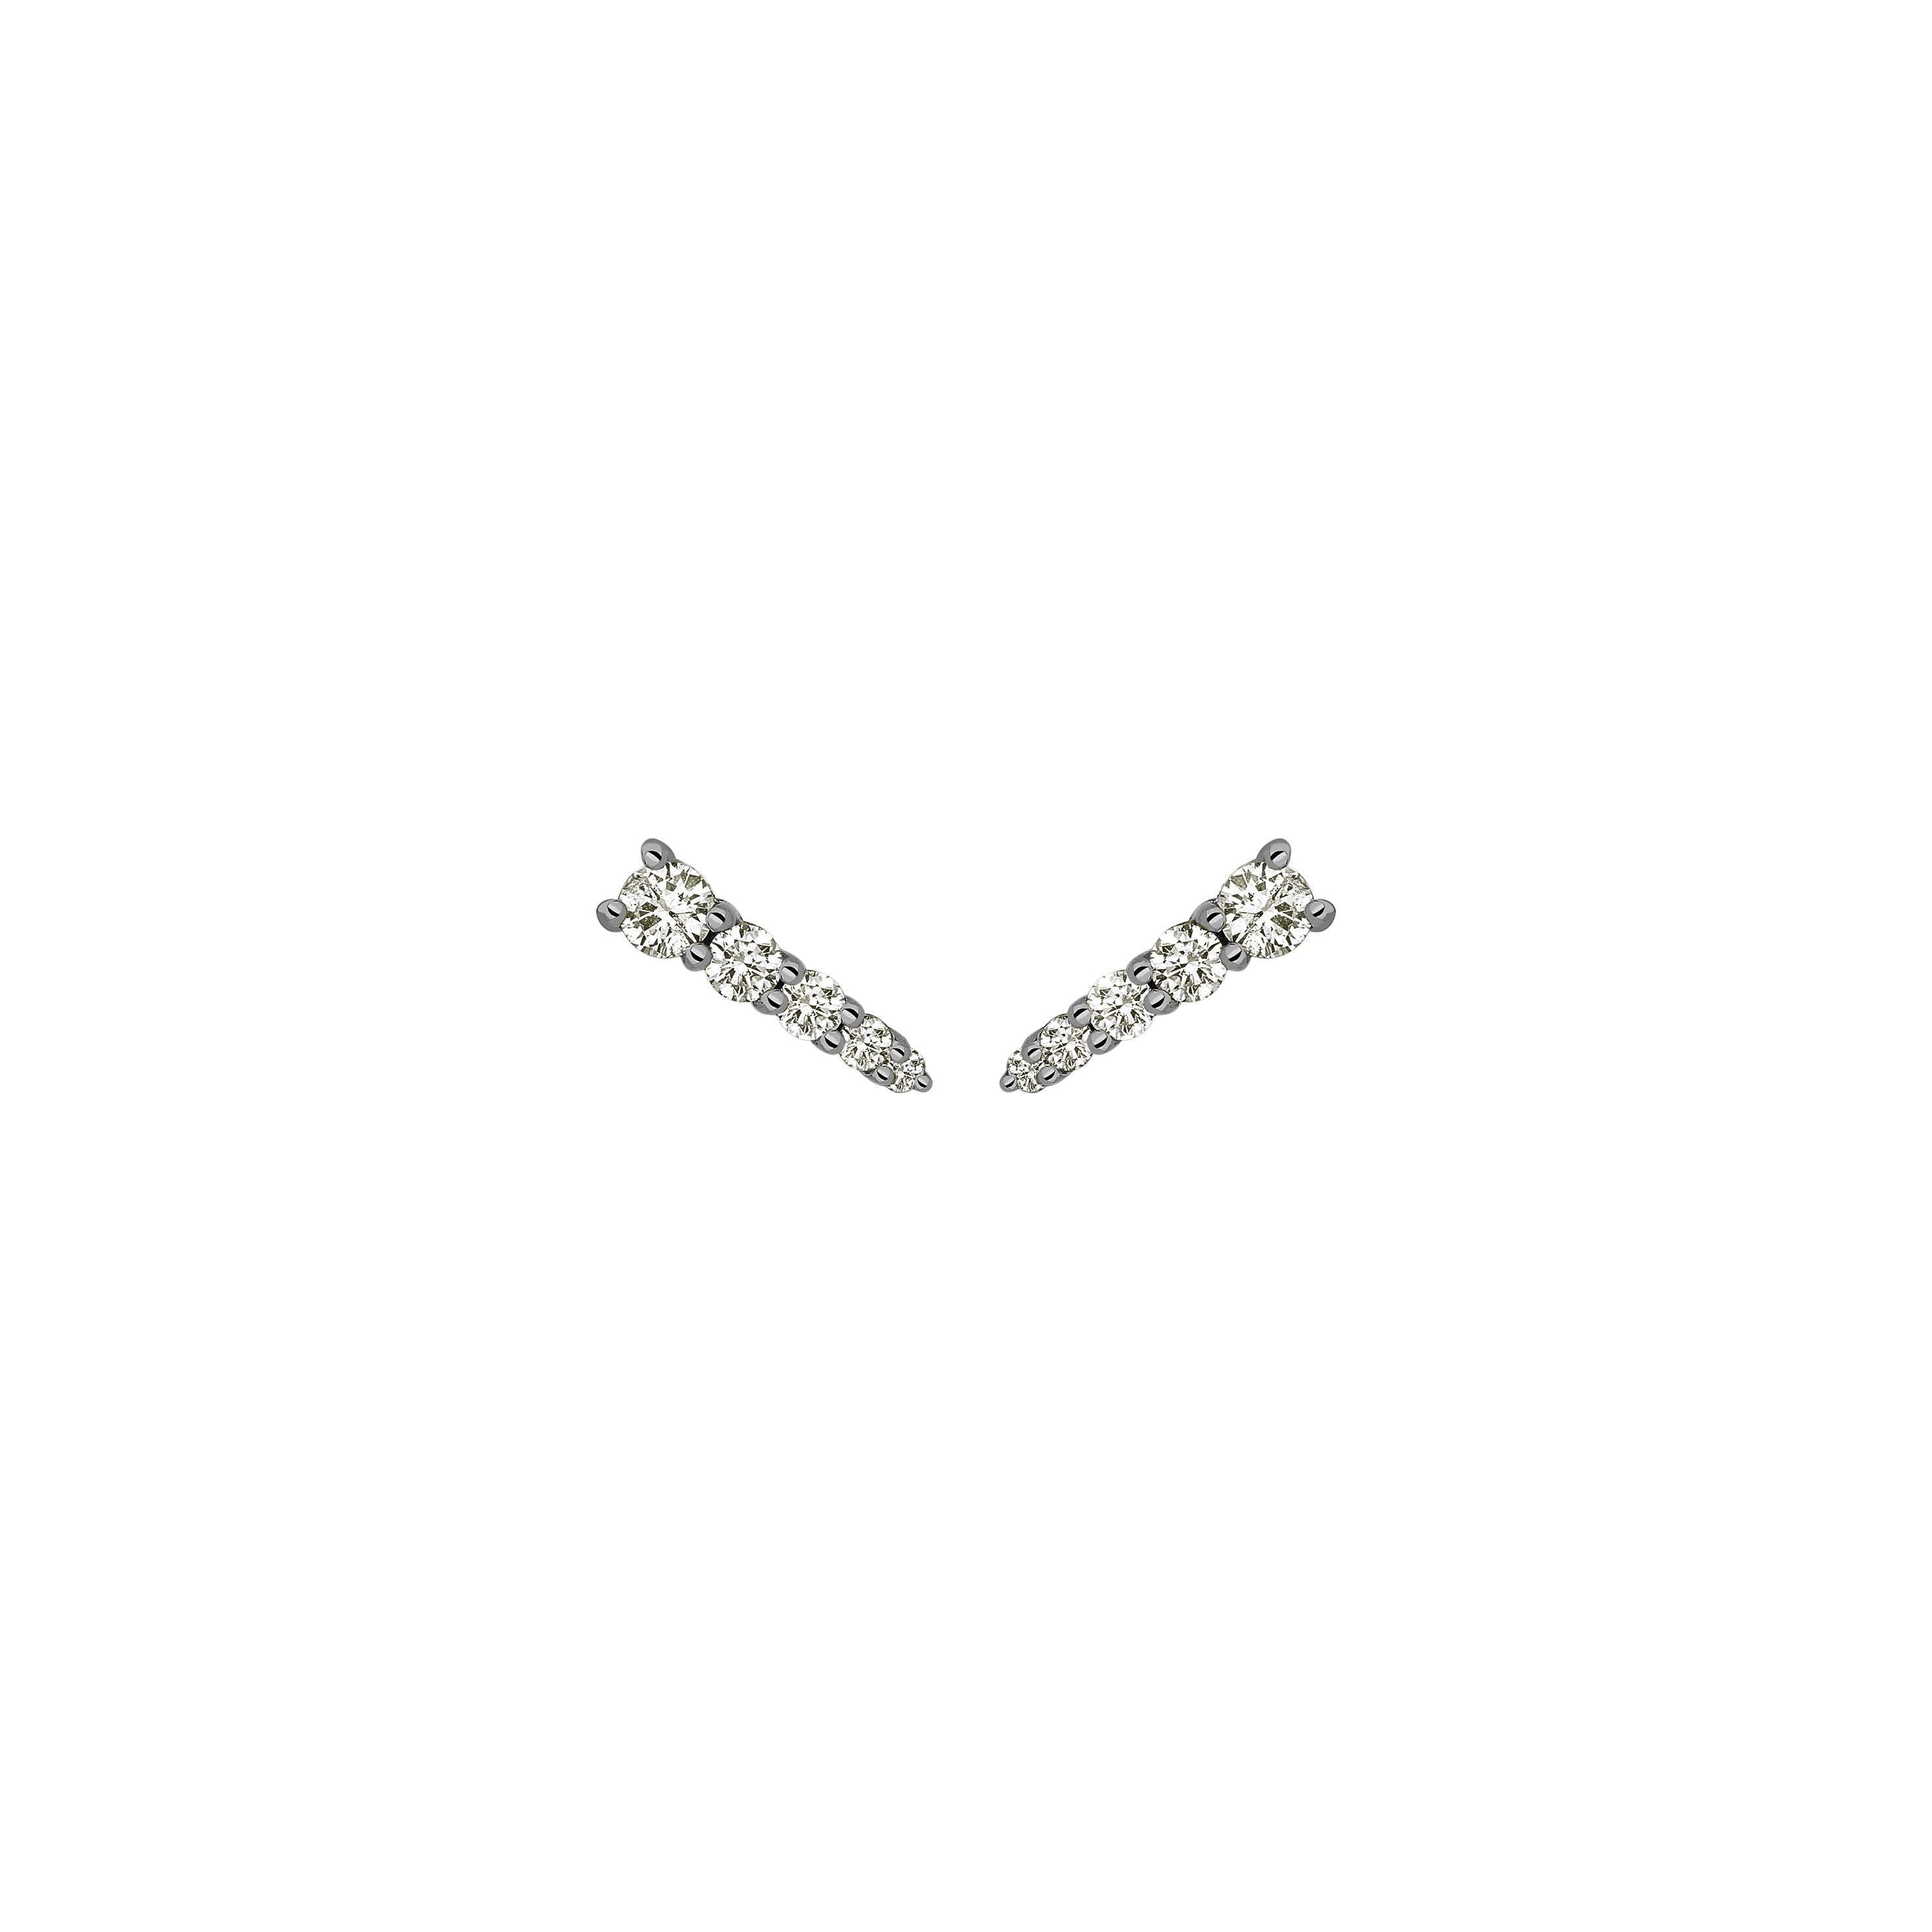 SMALL ROCK STAR COMET EARRING IN BLACK RHODIUM PLATED 18K WHITE GOLD WITH DIAMOND